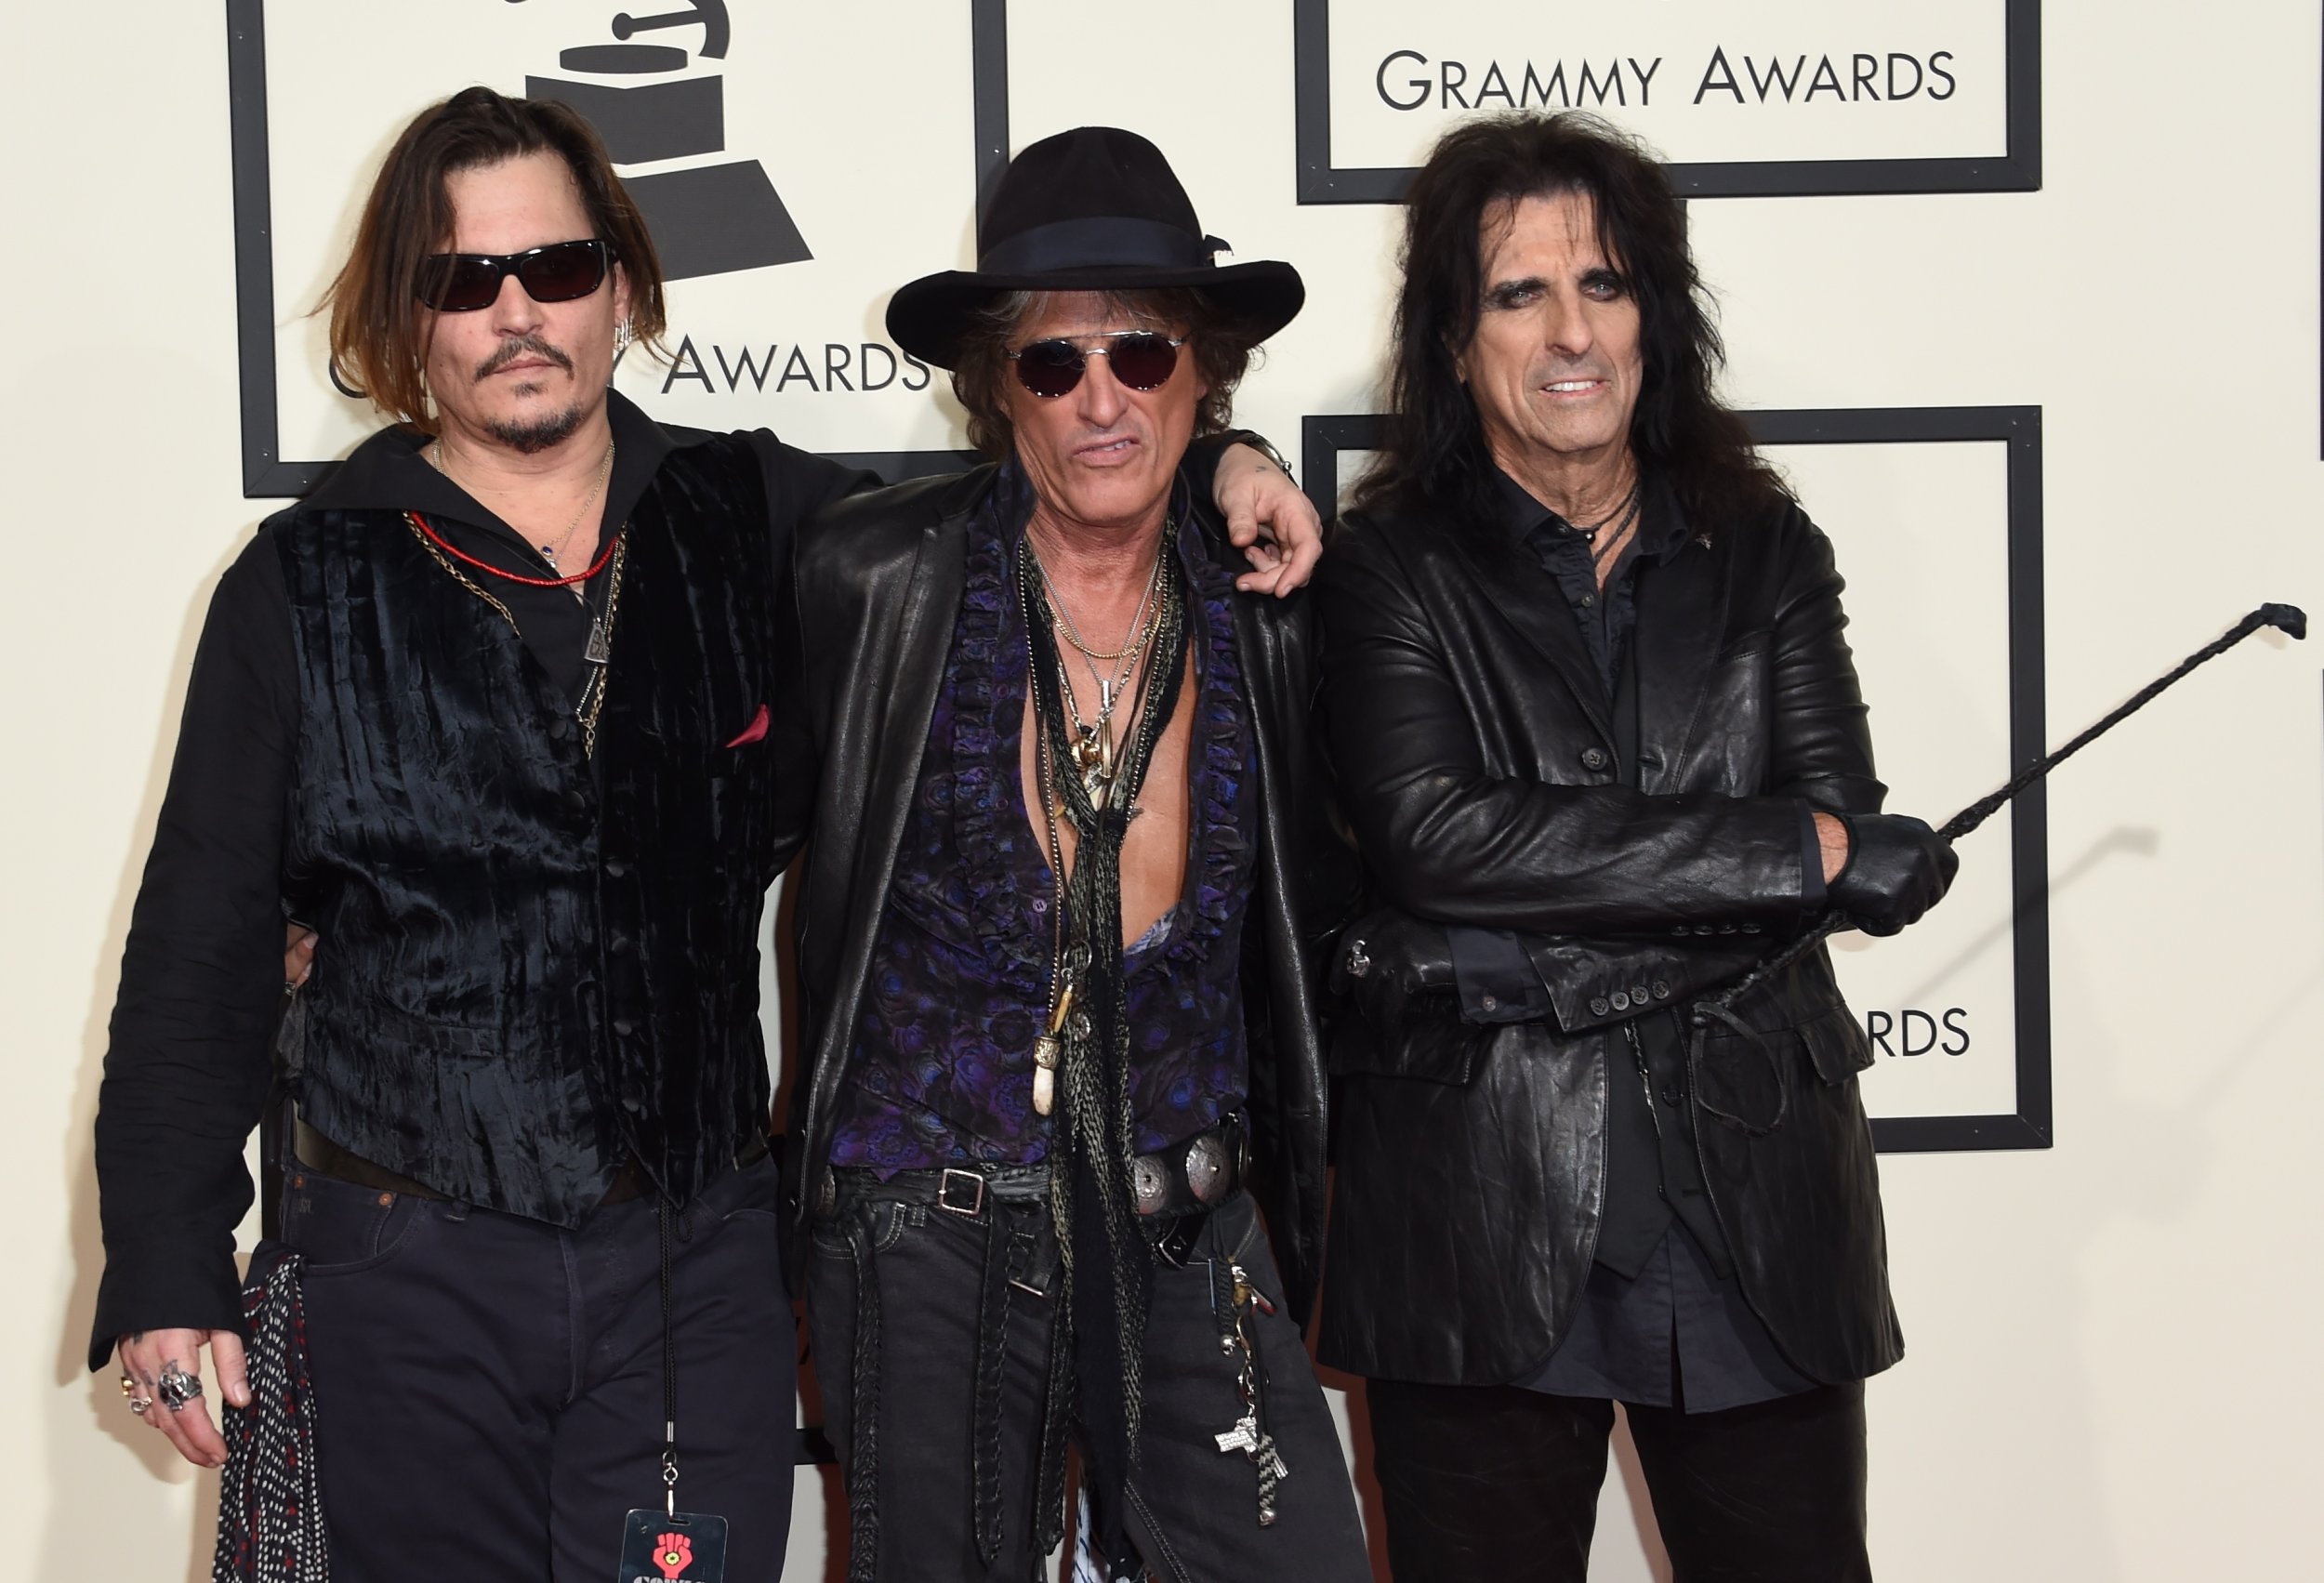 Johnny Depp Talks Playing With Hollywood Vampires Ahead Of Grammy